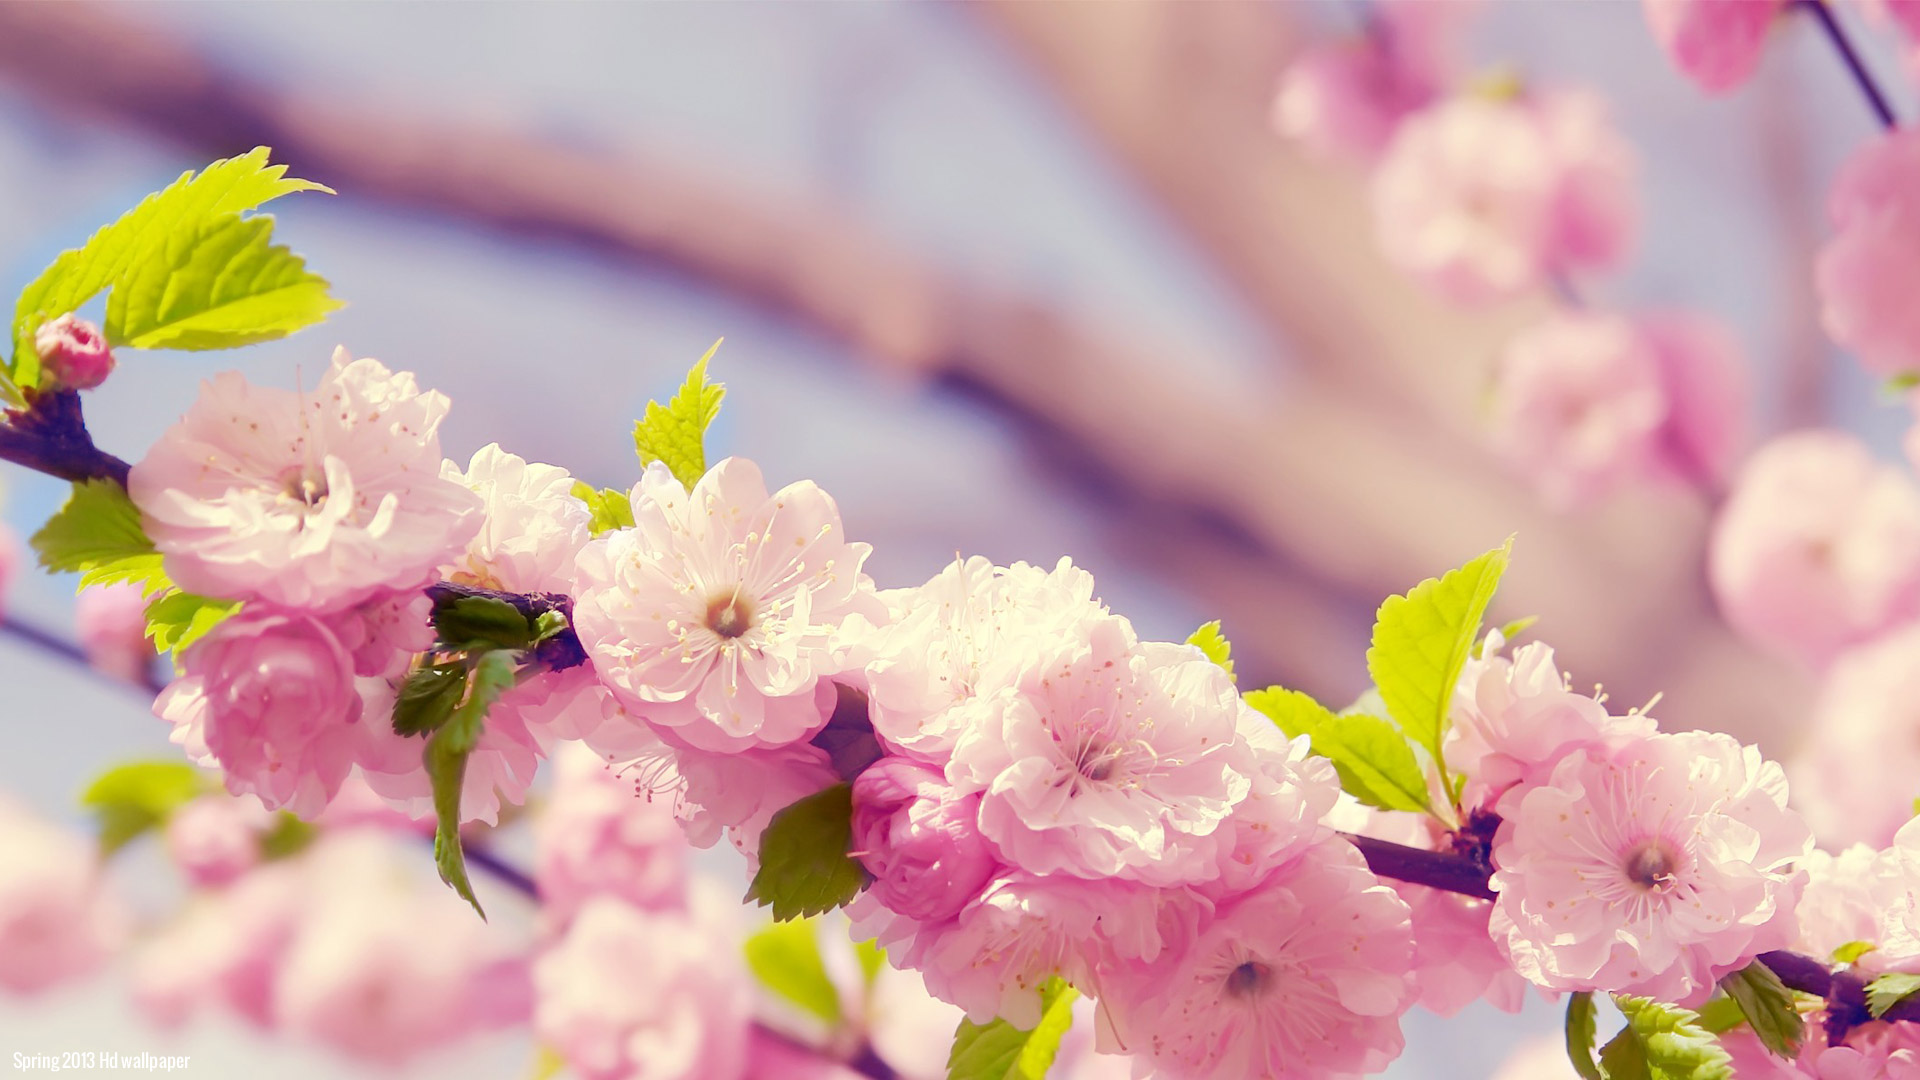 Beautiful Spring Flowers Images Pictures and Wallpapers Flower 1920x1080